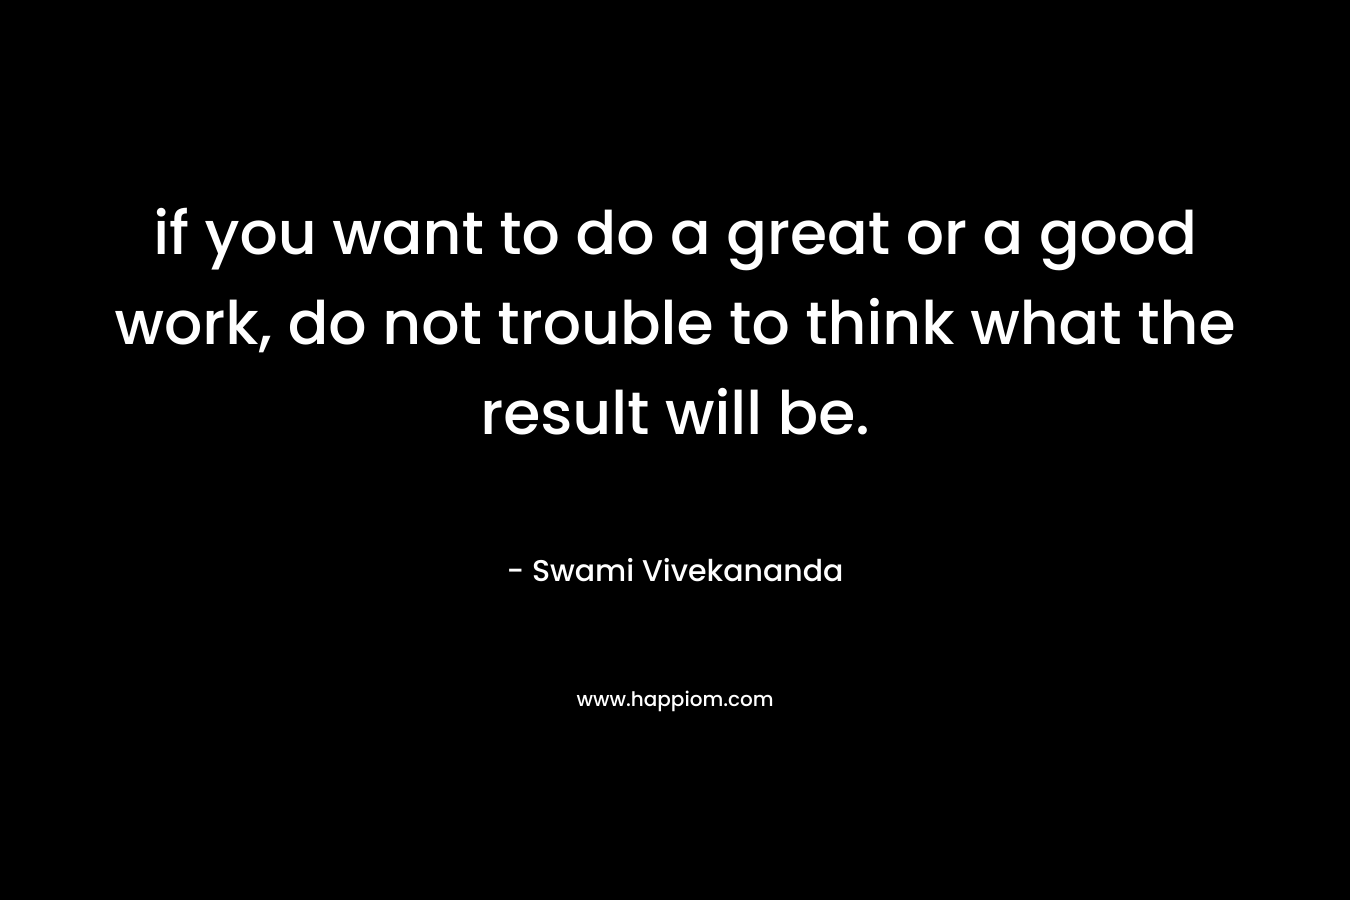 if you want to do a great or a good work, do not trouble to think what the result will be.